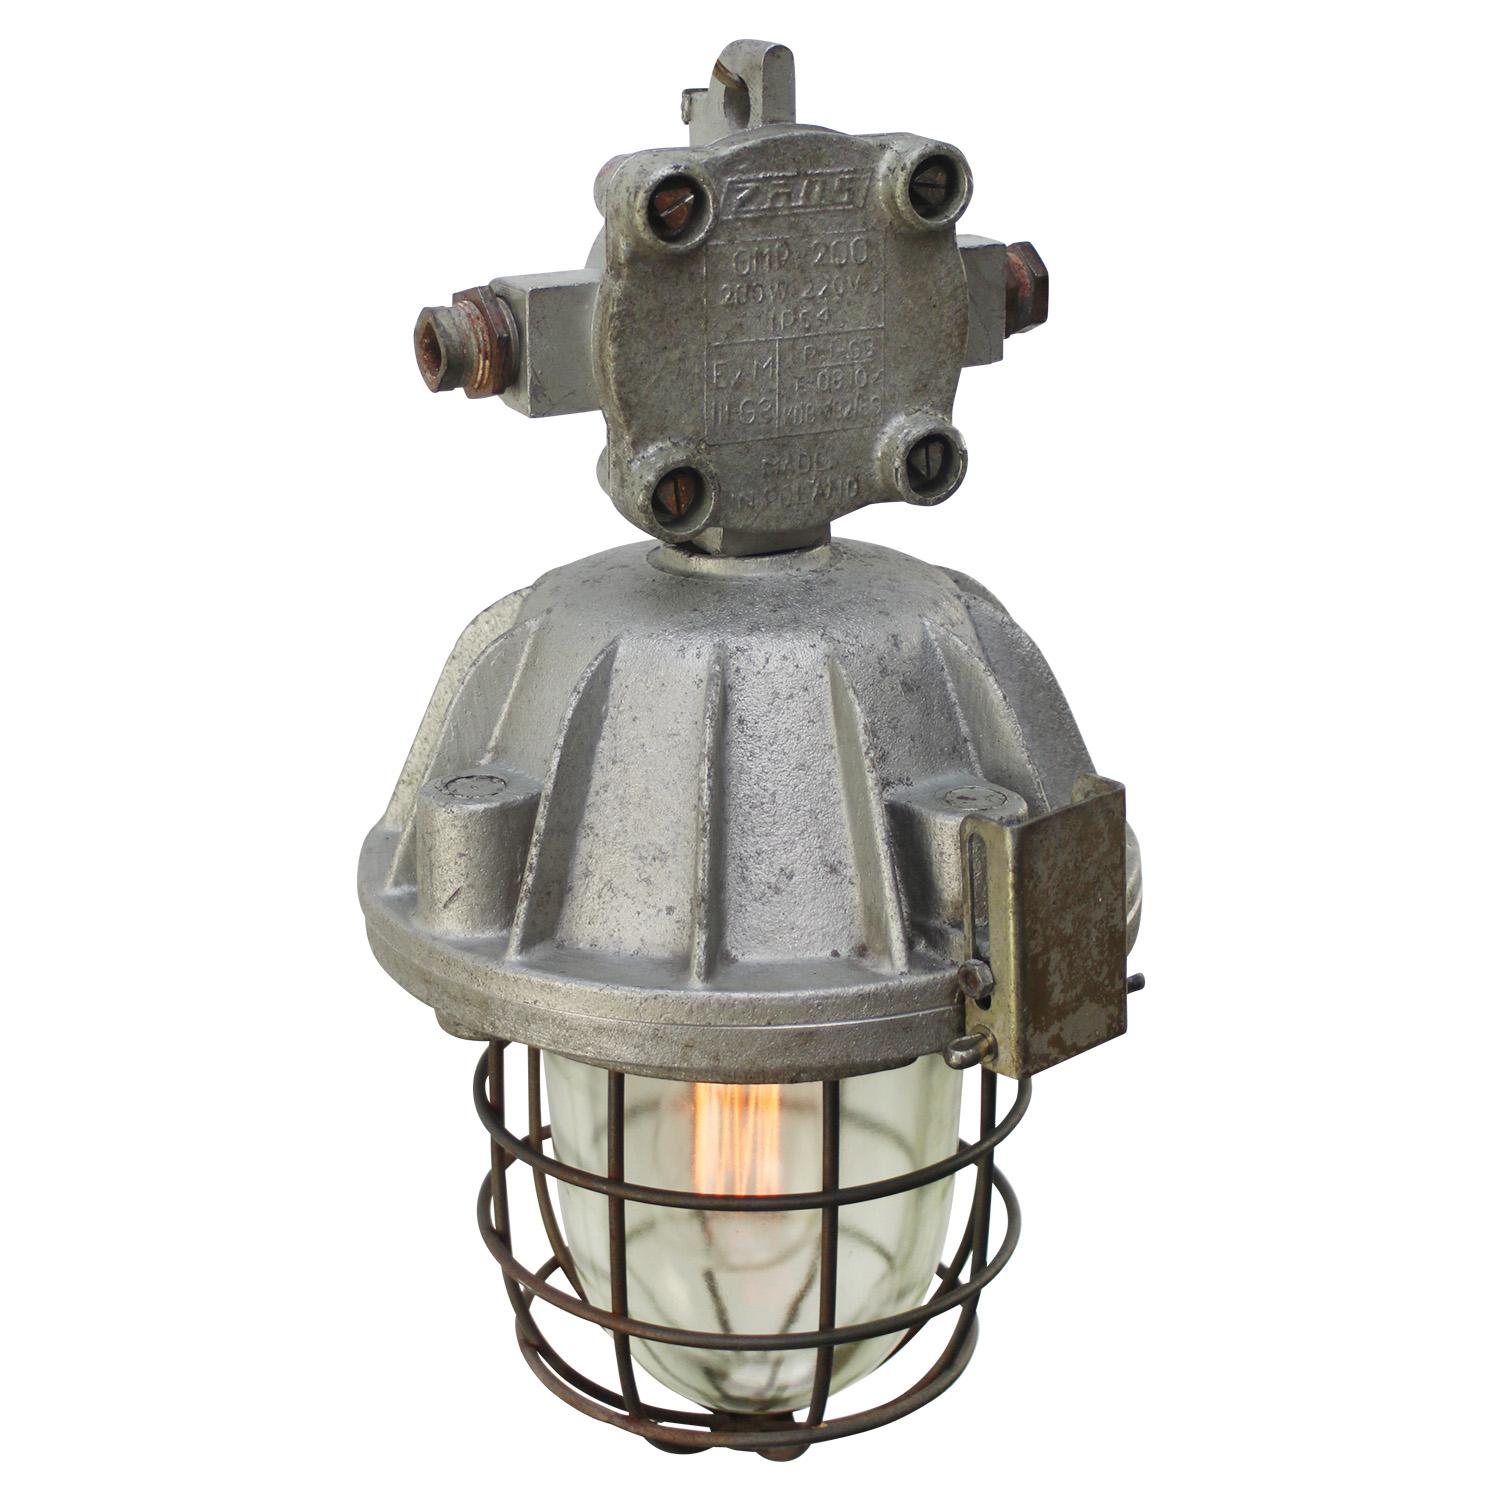 Industrial hanging lamp
silver grey cast aluminium
clear glass

Weight: 9.00 kg / 19.8 lb

Priced per individual item. All lamps have been made suitable by international standards for incandescent light bulbs, energy-efficient and LED bulbs. E26/E27